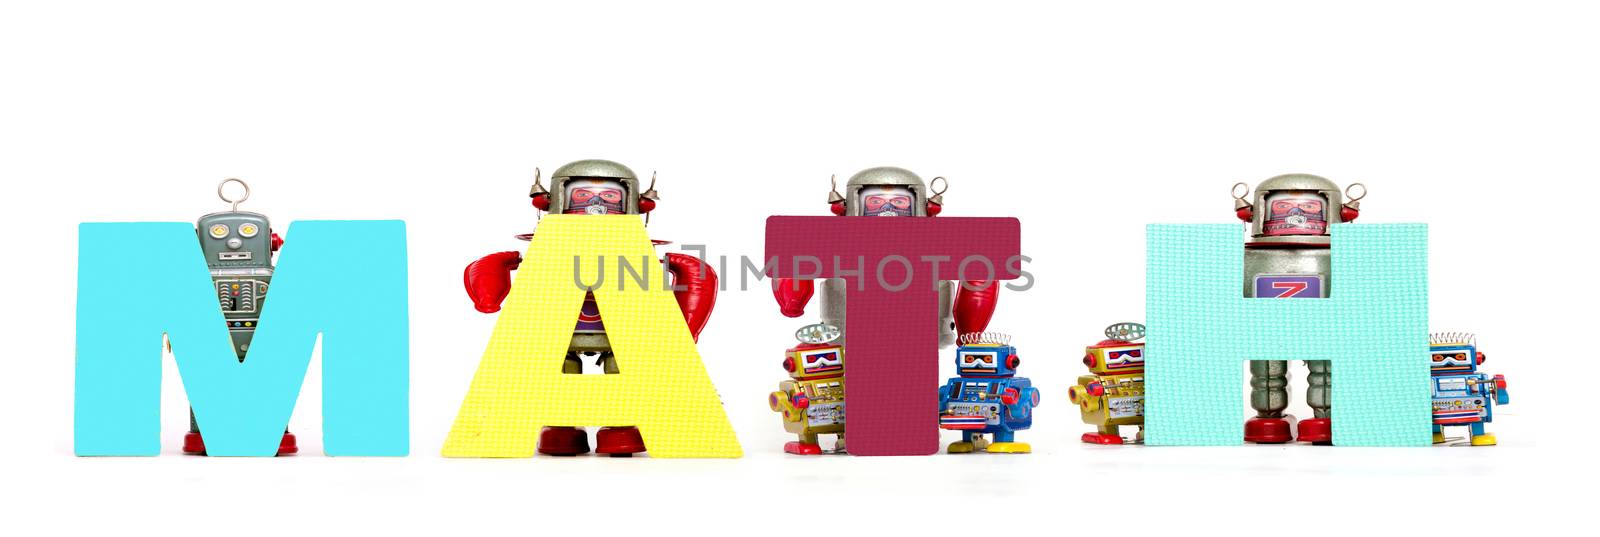 retro tin robot toys hold up the word MATH isolated on white 